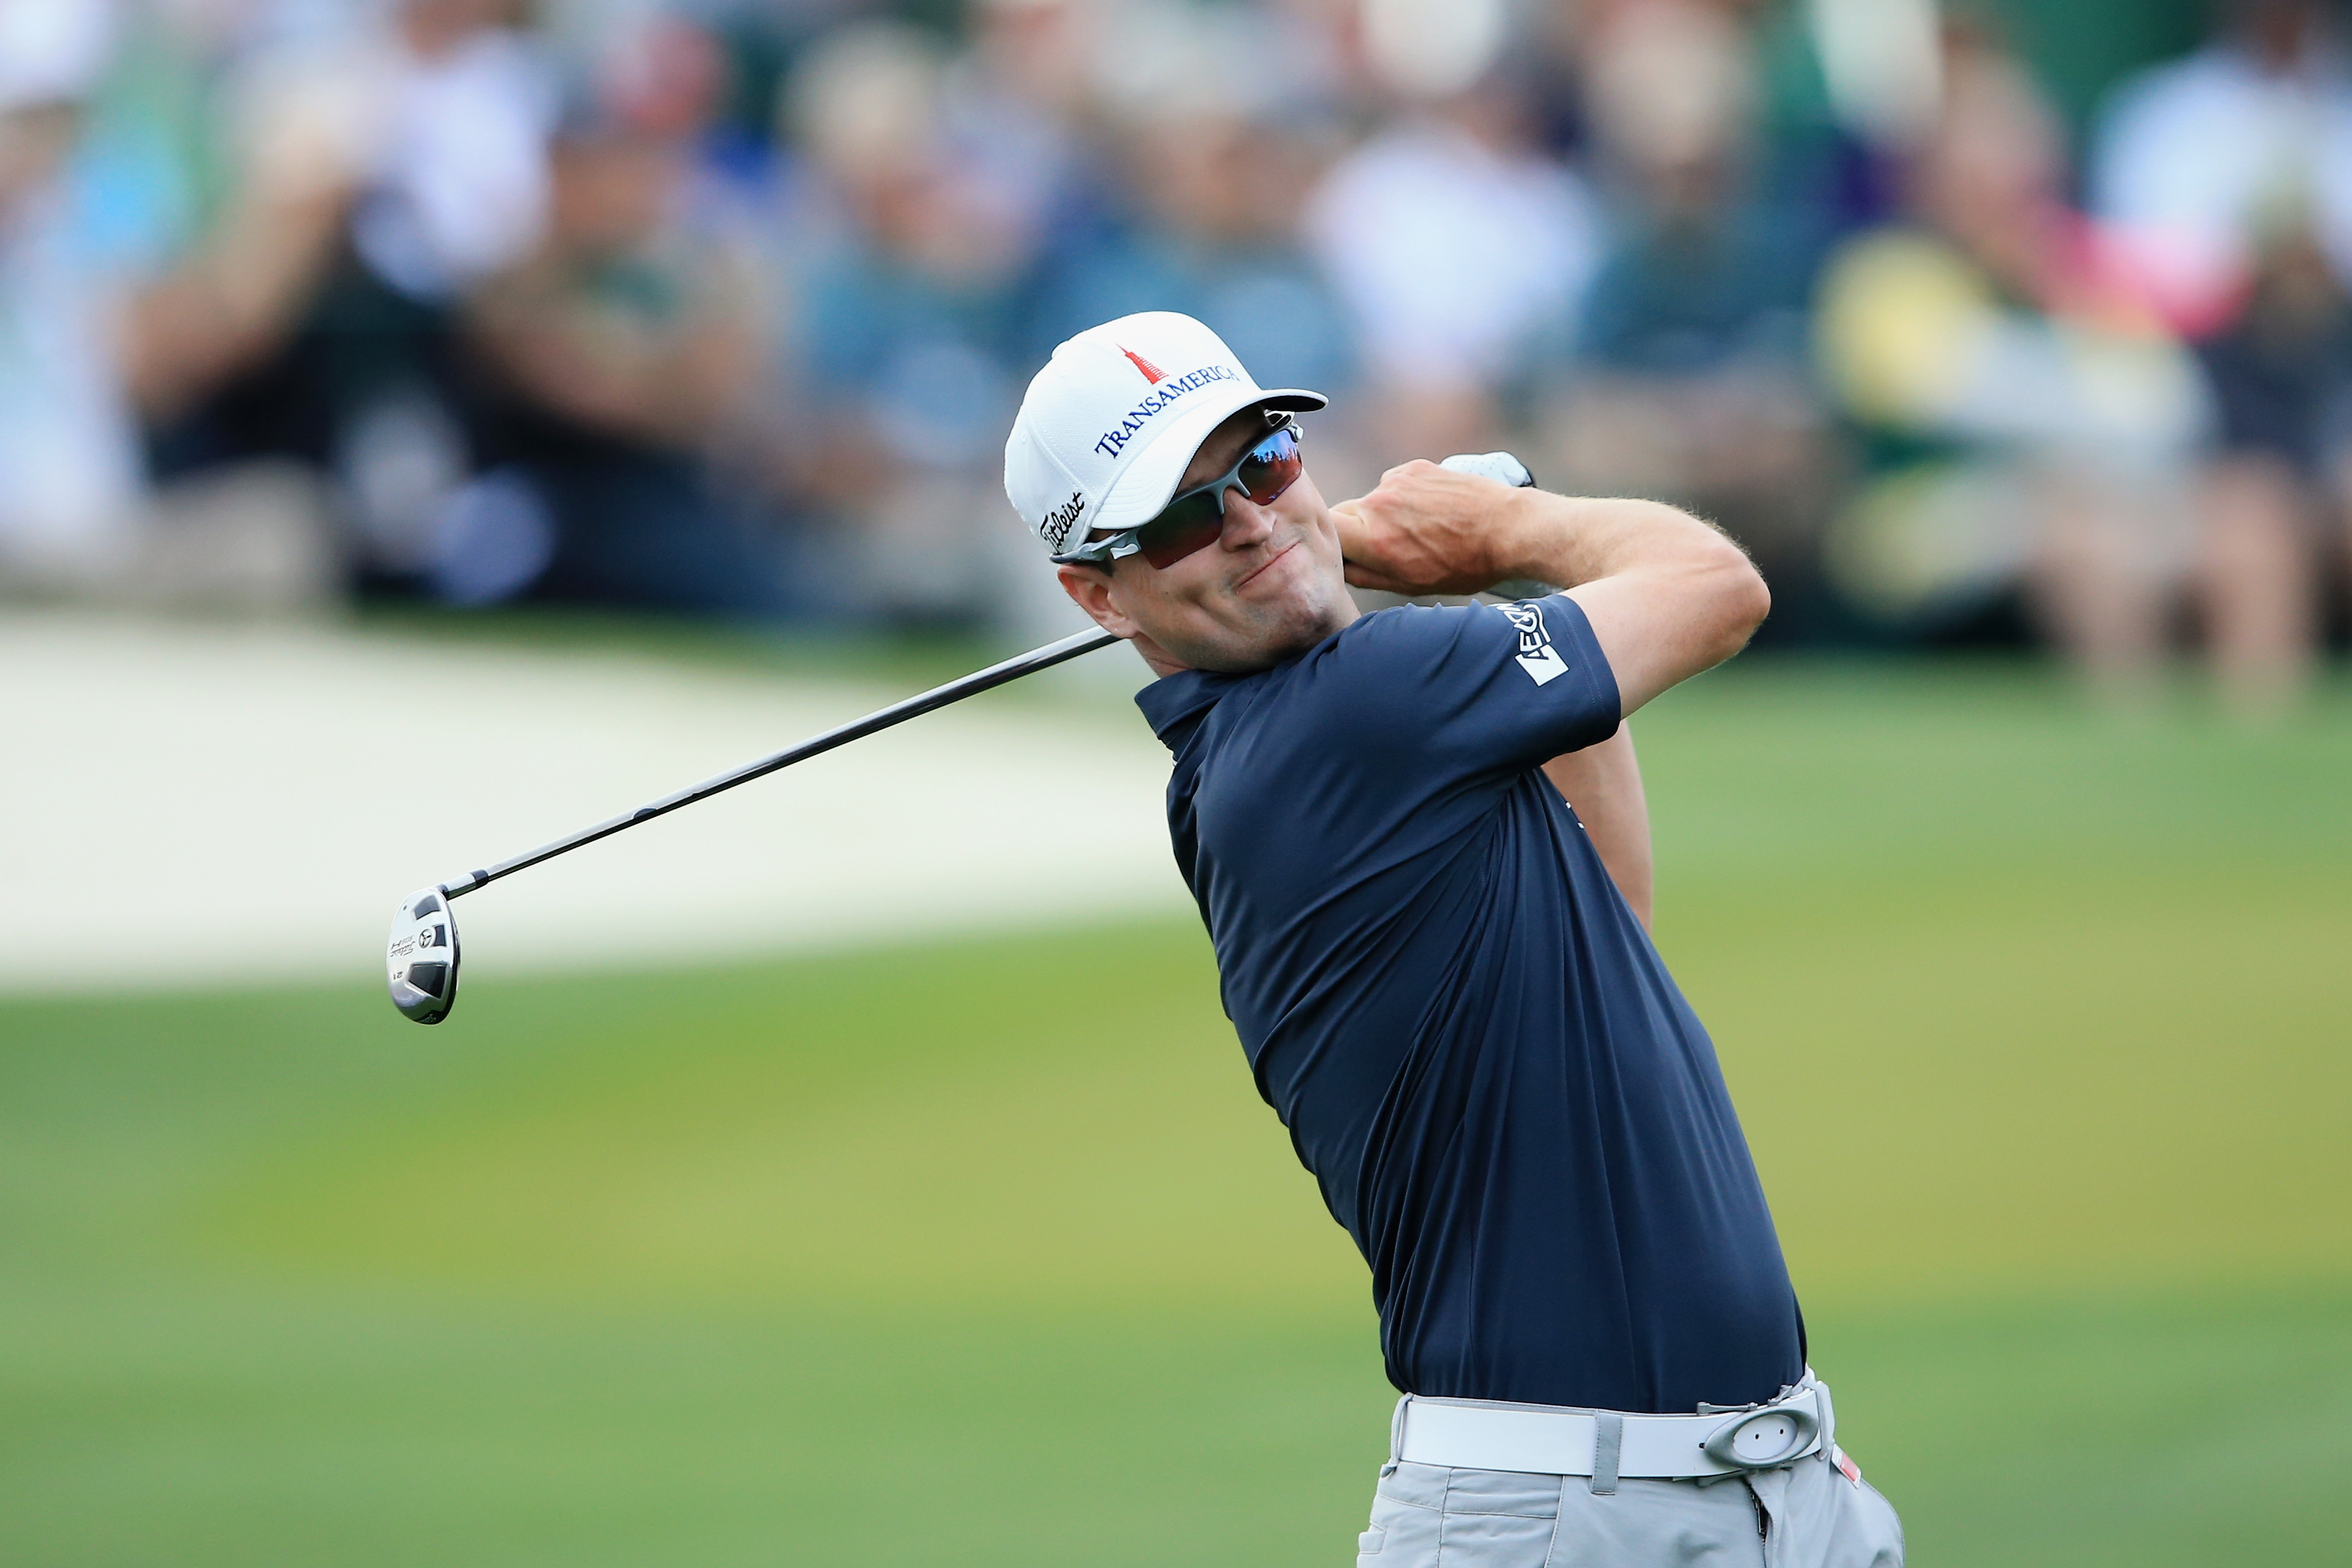 How to Watch RBC Heritage 2015 Live Stream Online